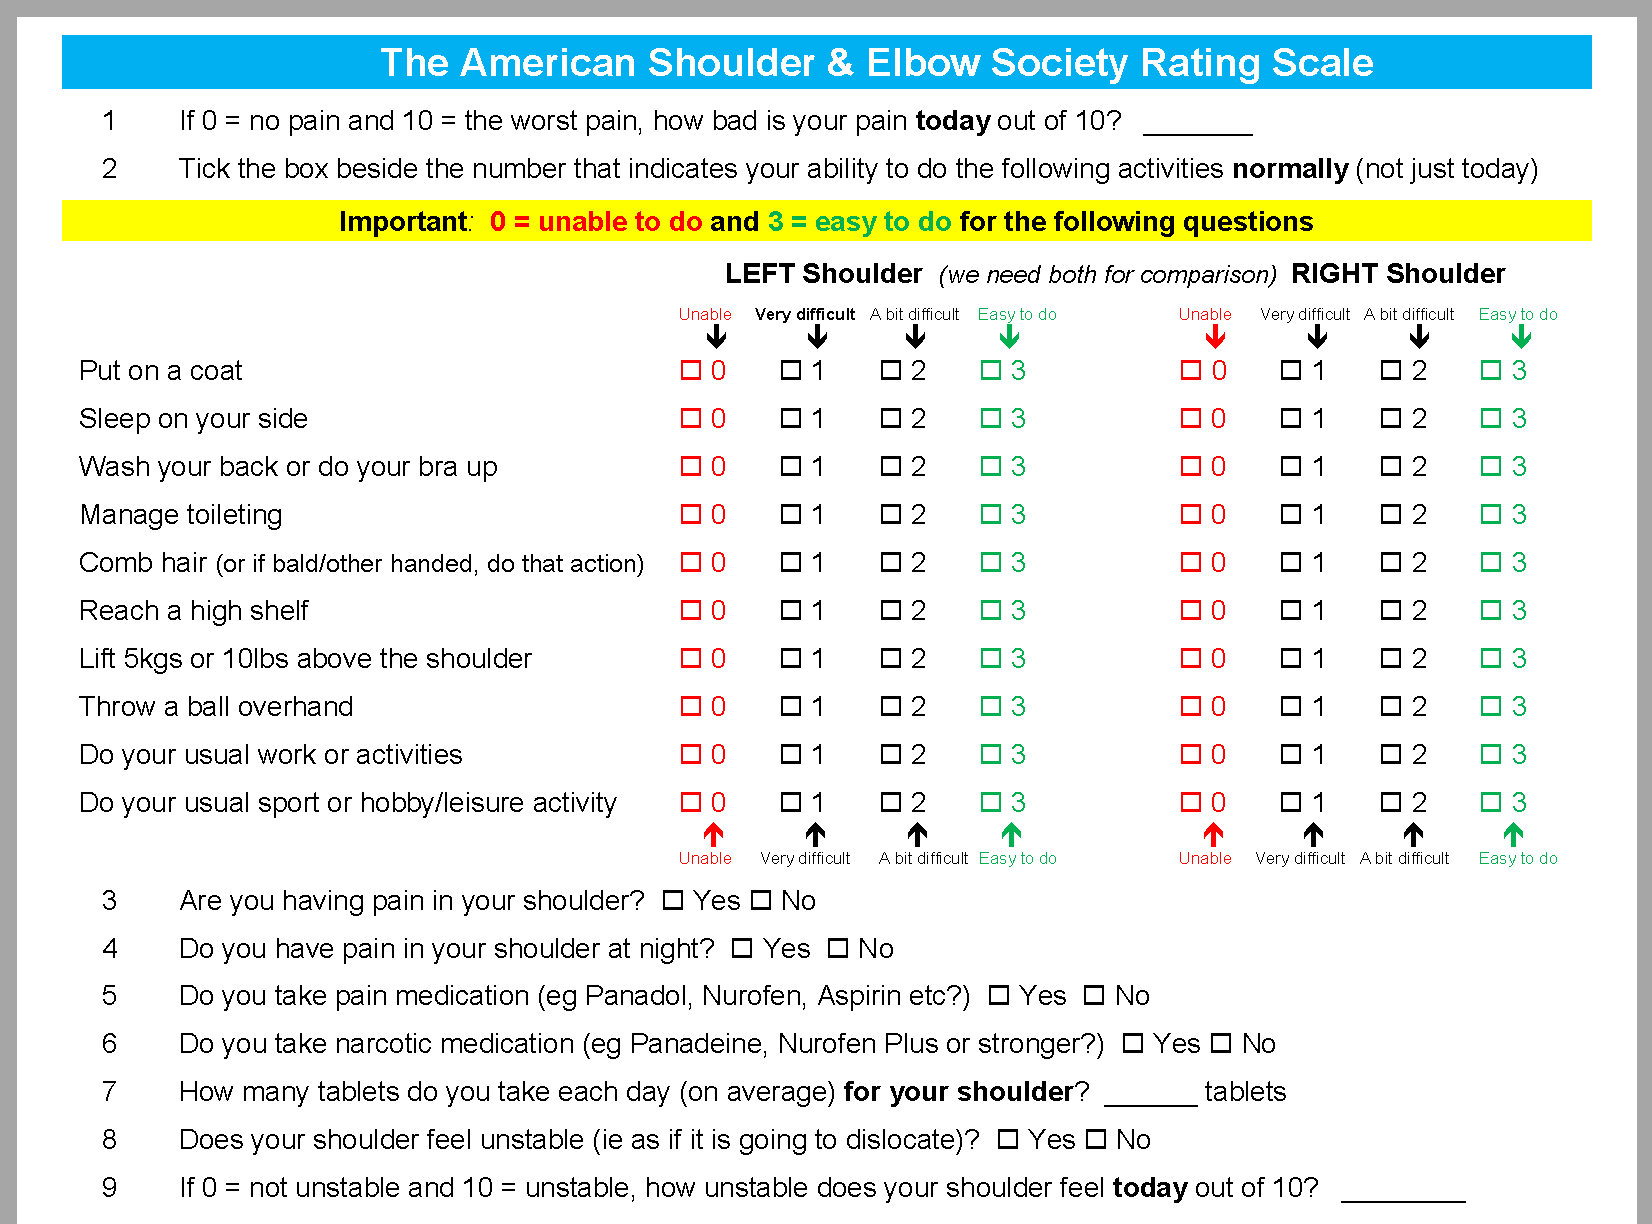 The American Shoulder & Elbow Society Rating Scale (Shoulder)